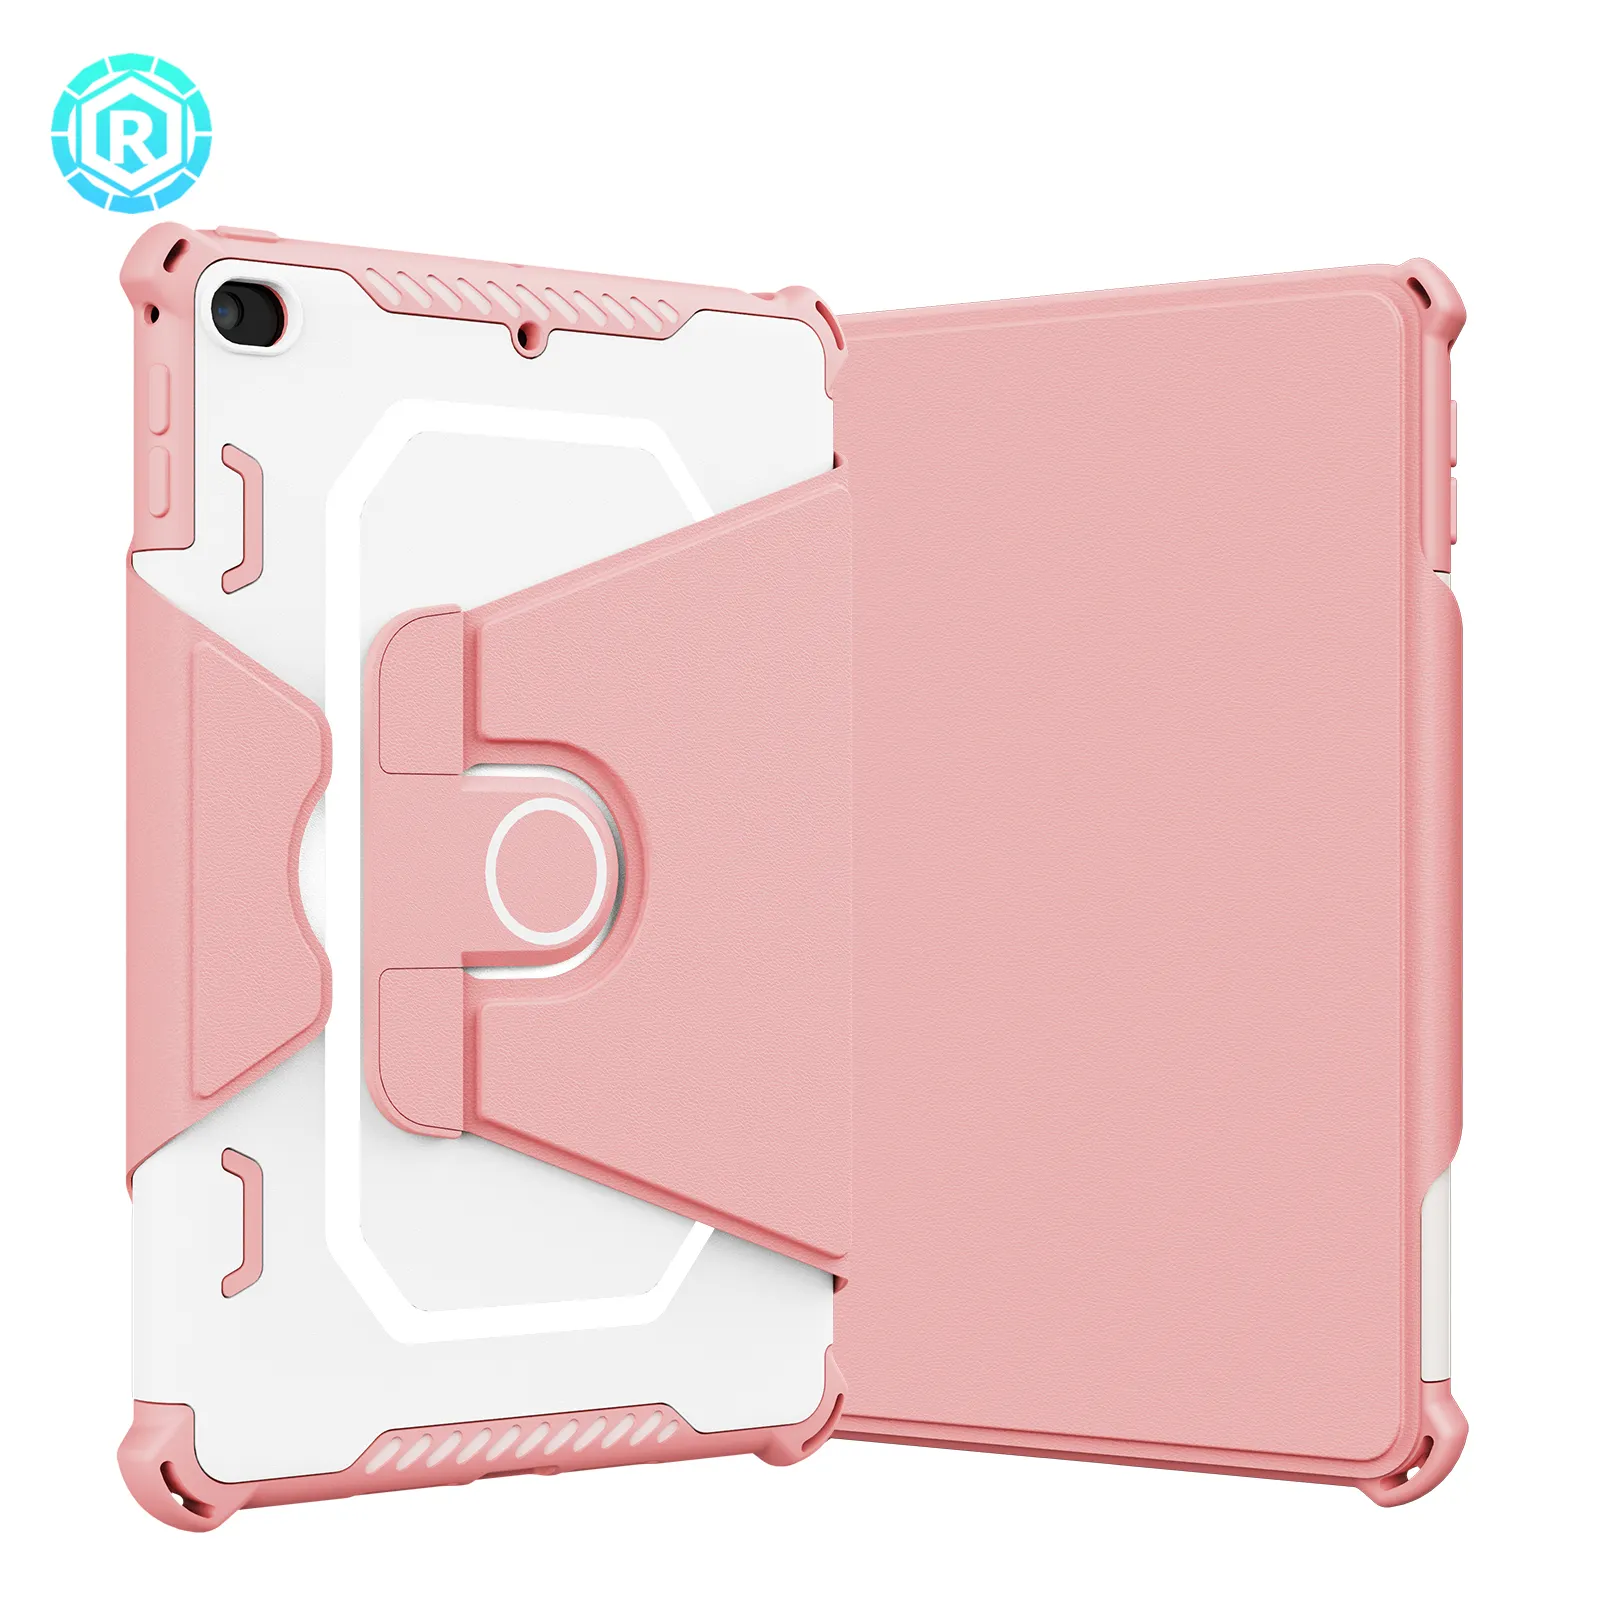 Hot Selling Universal Case For Apple IPad Mini 4 Mini 5 Multi-angle Viewing Stand Cover With Pencil Holder